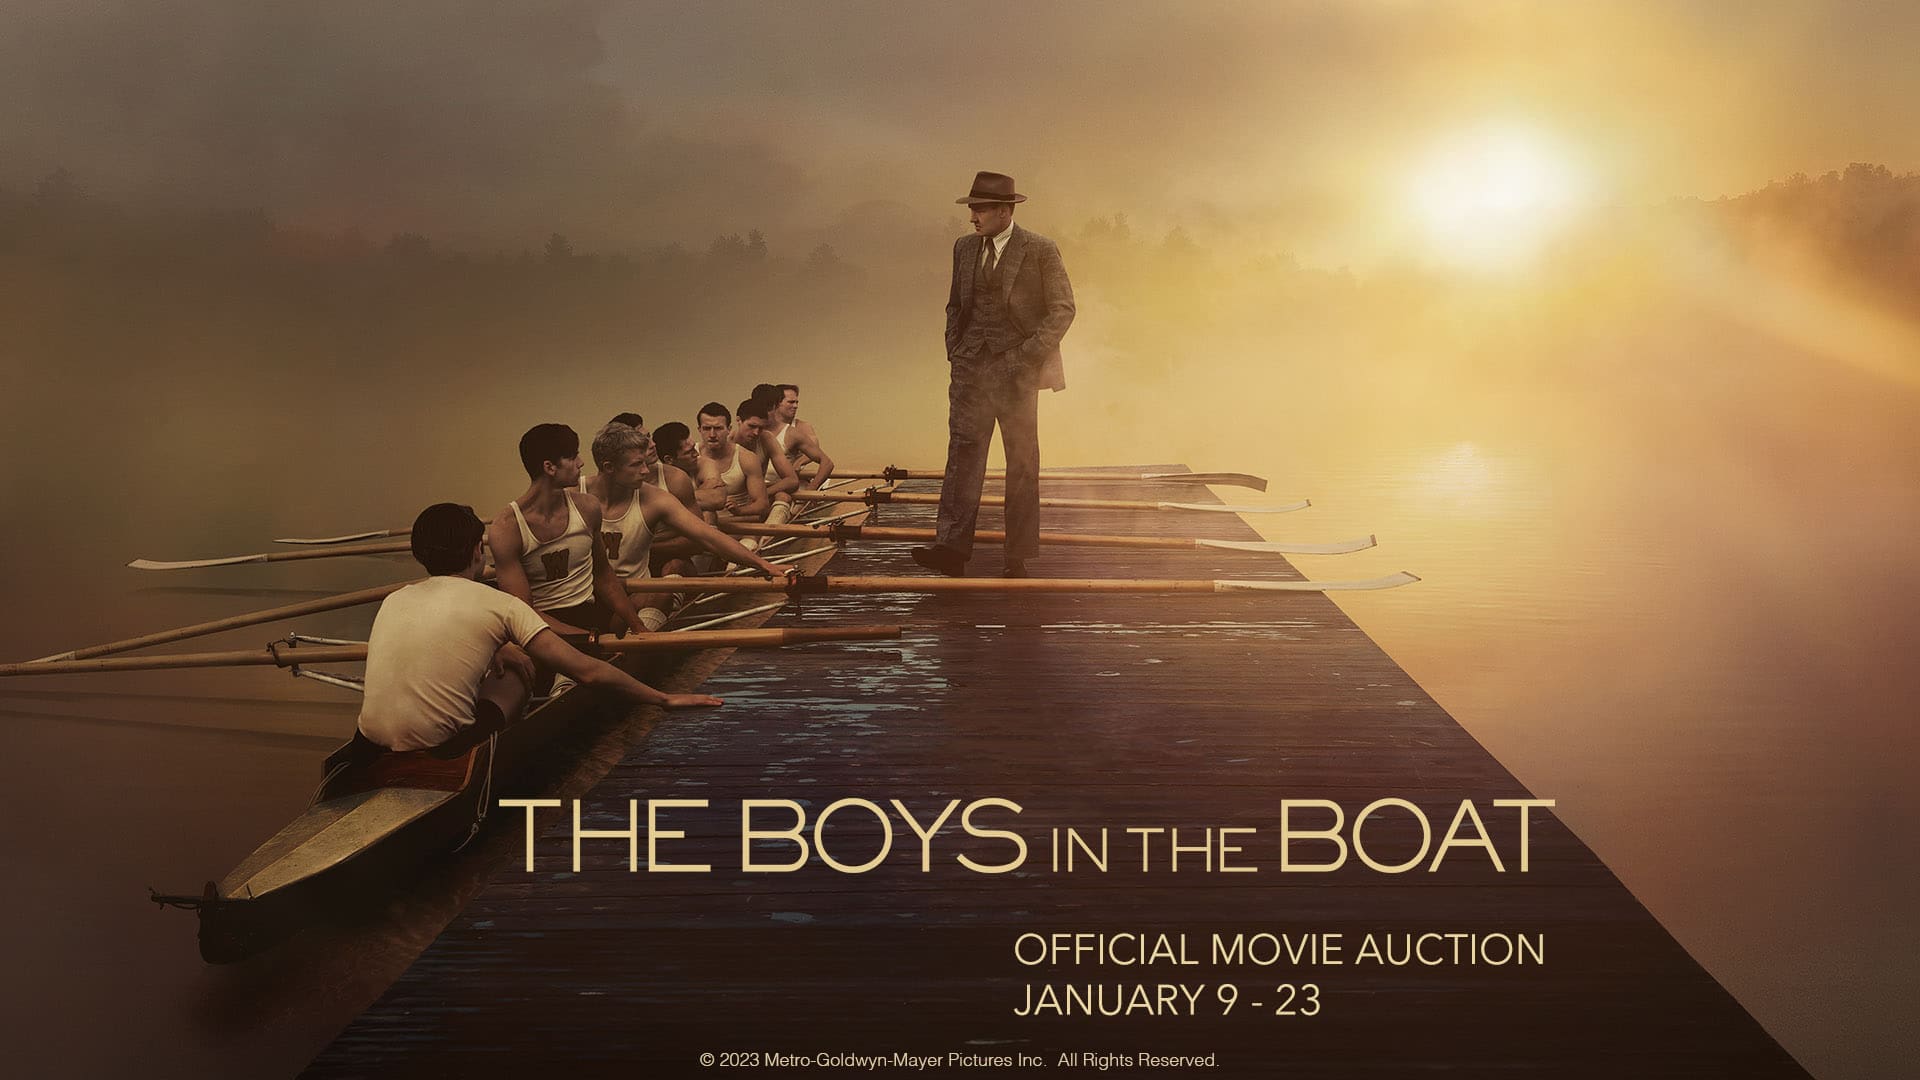 Official poster for The Boys in the Boat prop and costume auction at VIPFanAuctions.com, January 9th-23rd